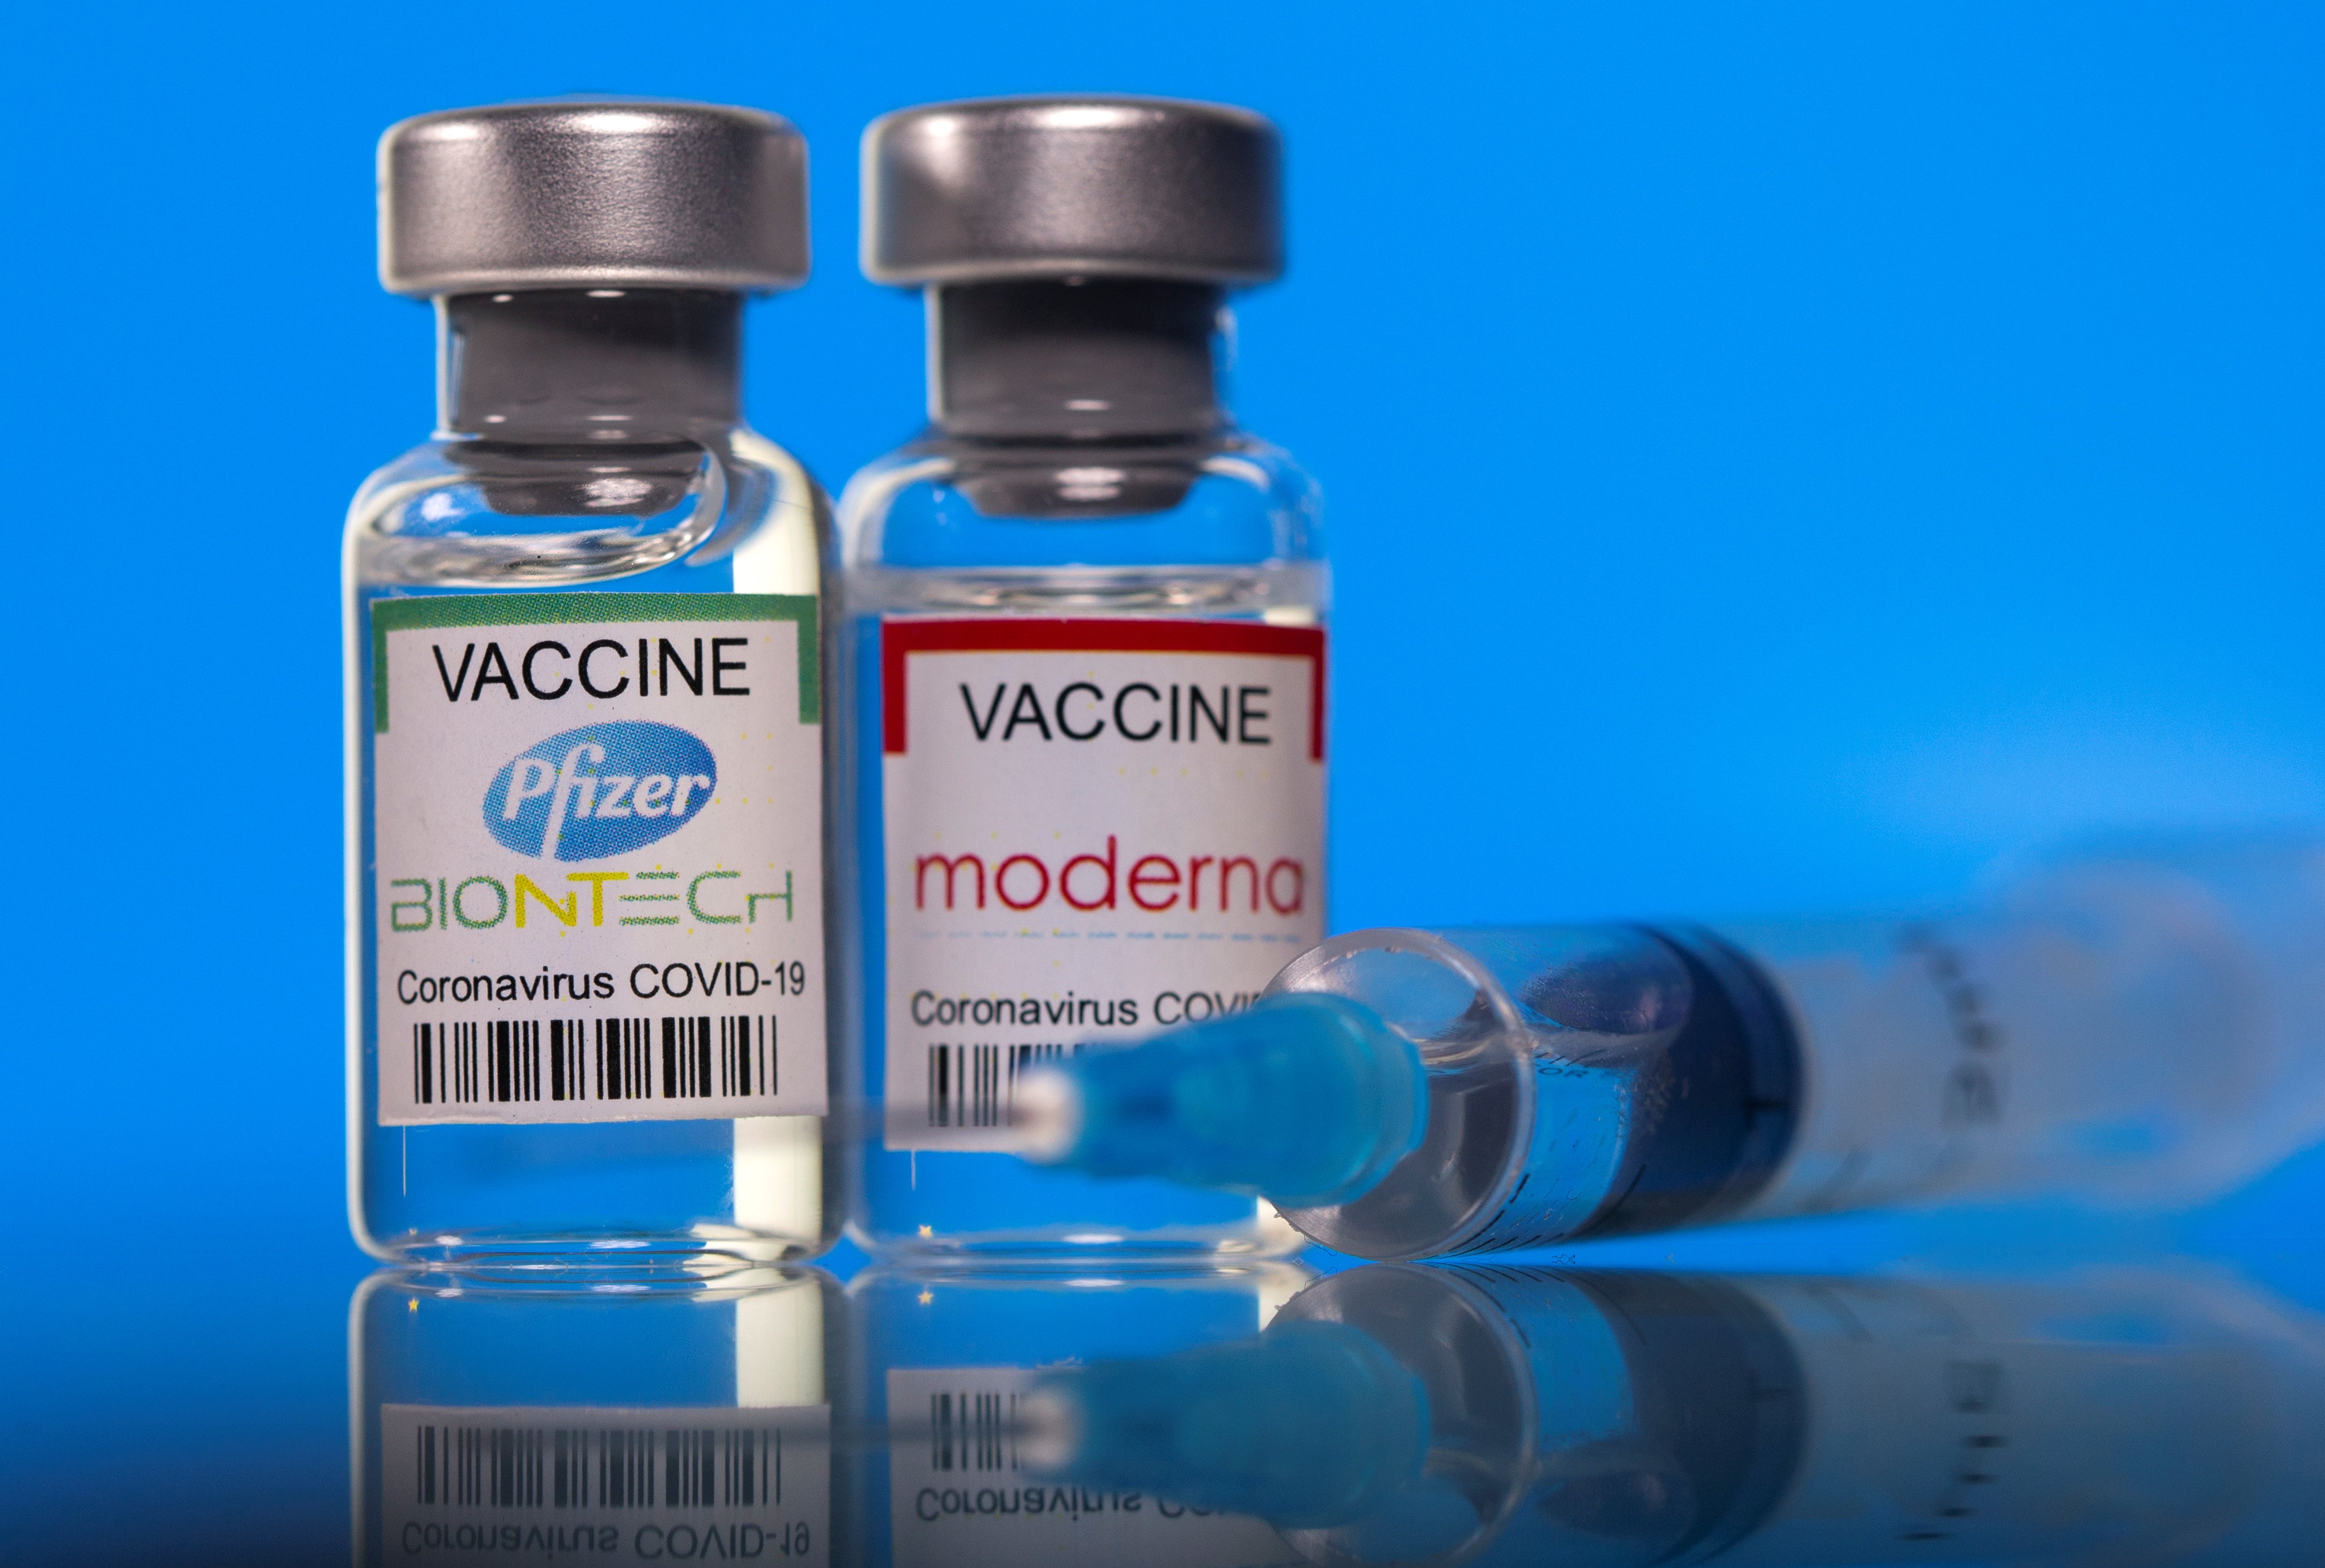 Scientists looked at the mRNA vaccines Pfizer and Moderna